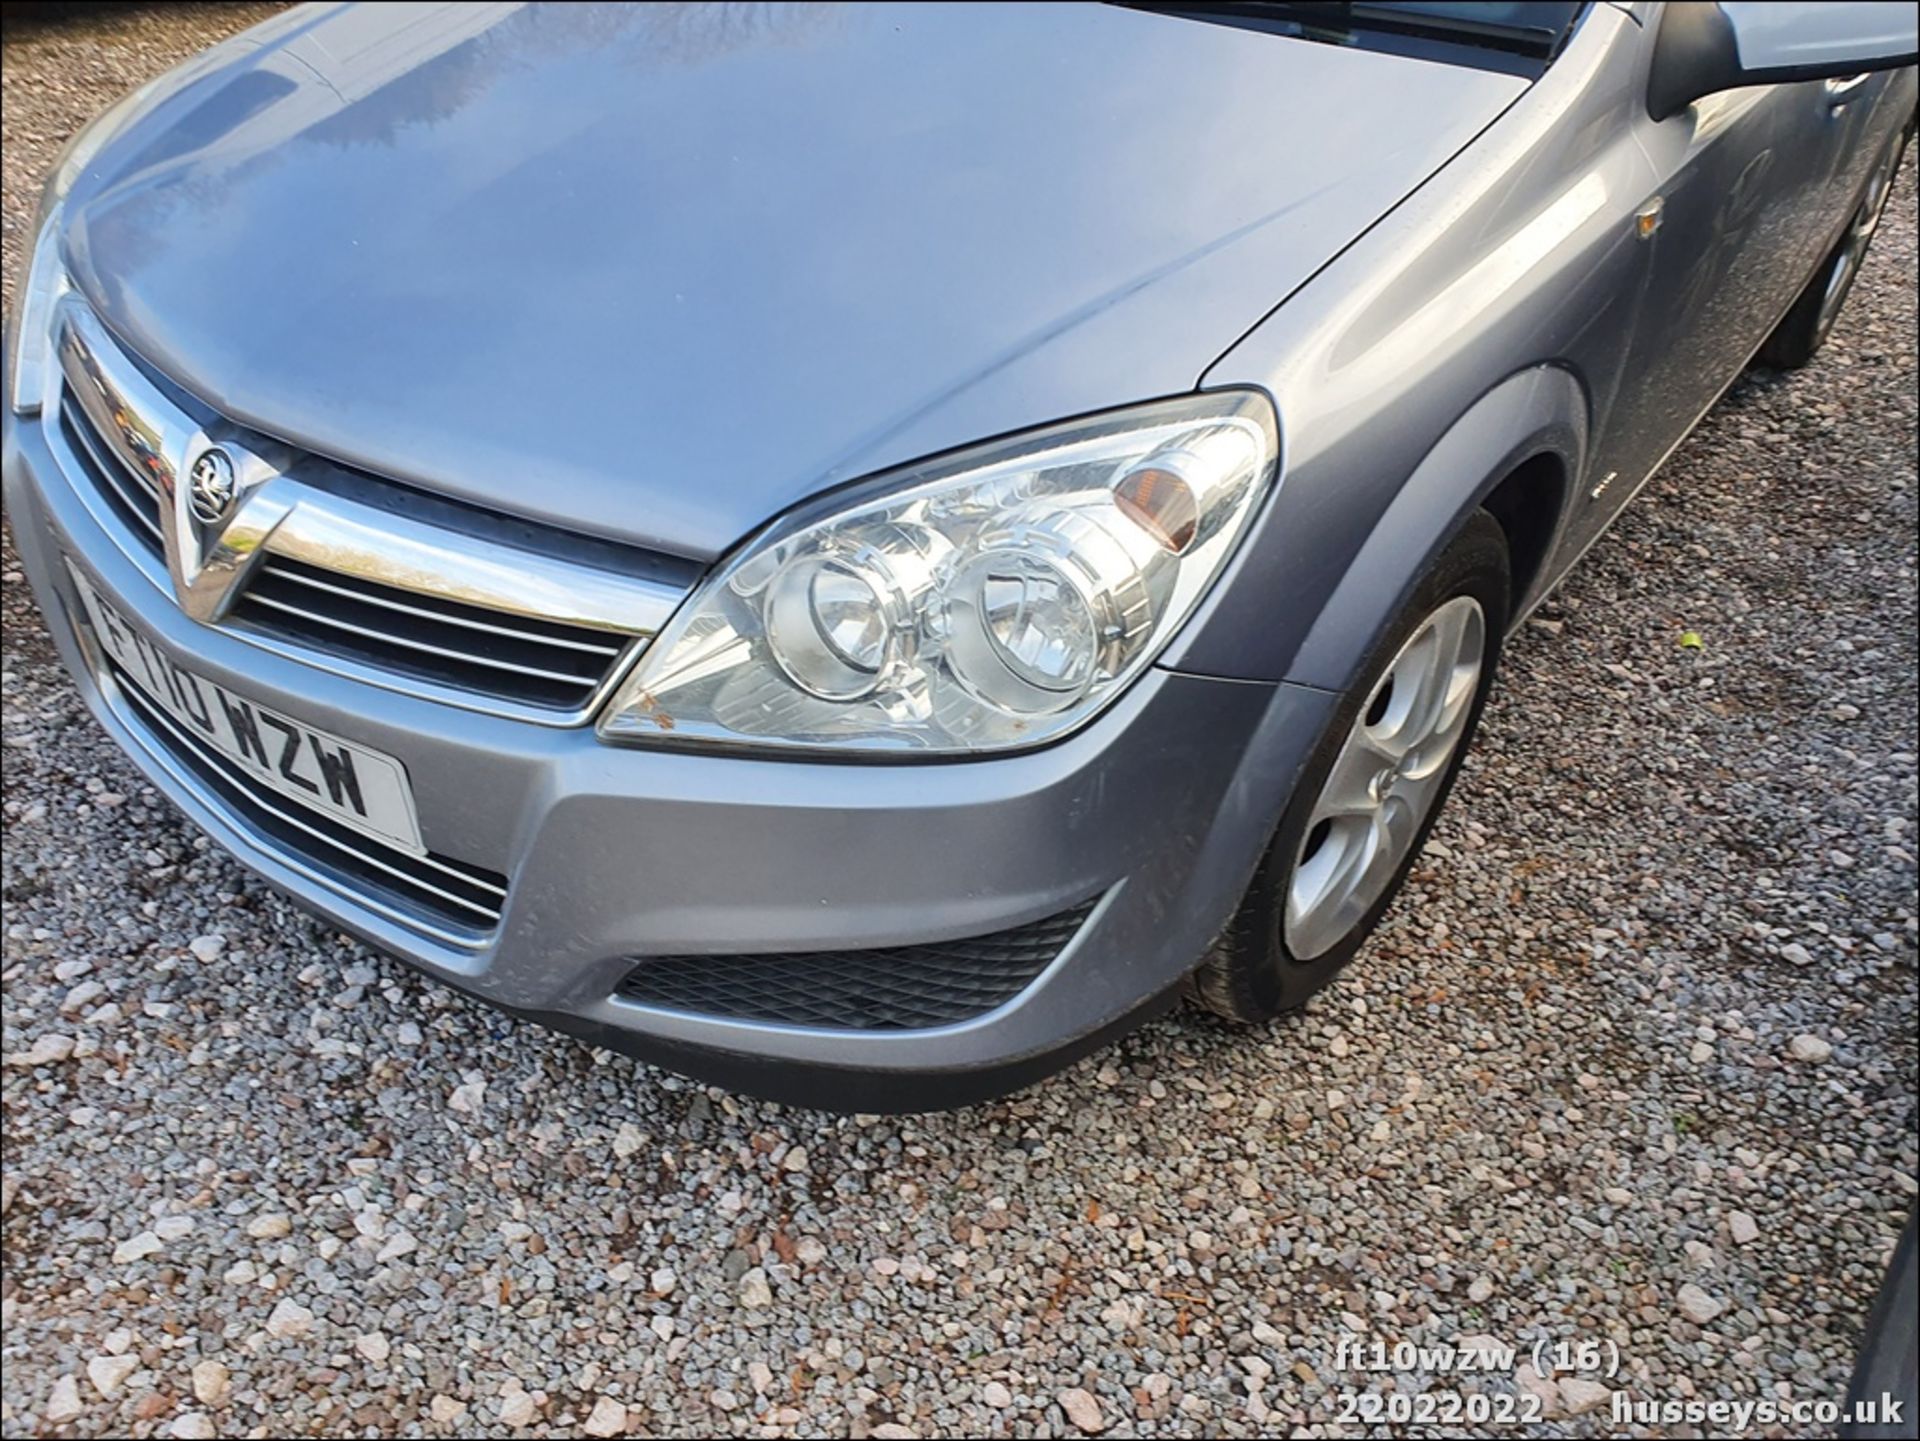 10/10 VAUXHALL ASTRA CLUB - 1364cc 5dr Hatchback (Silver) - Image 17 of 29